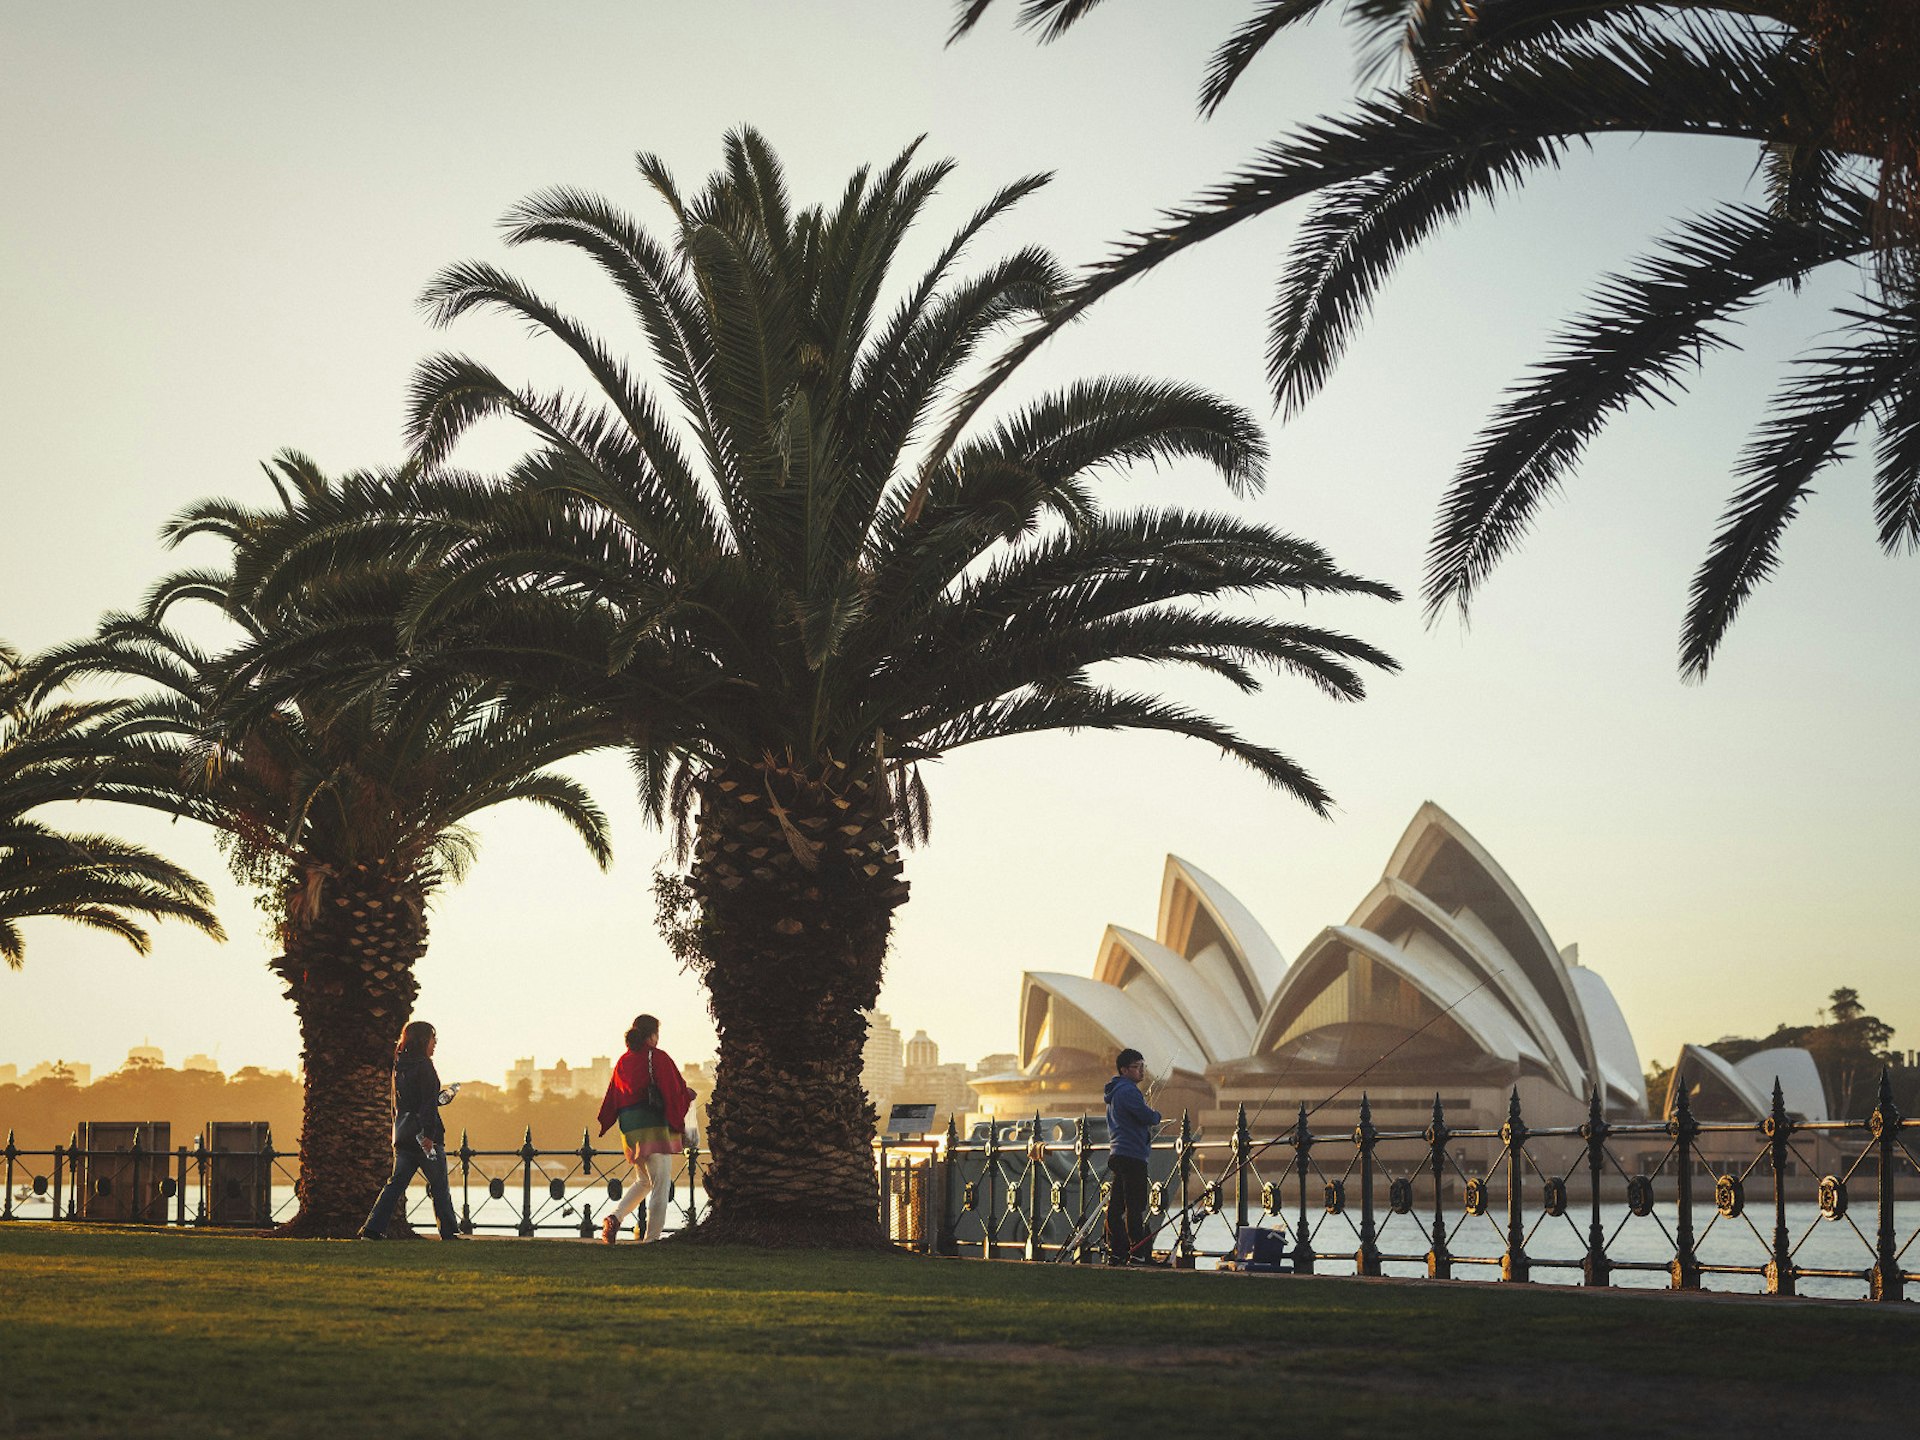 Sydney Opera House, glows in the early morning light